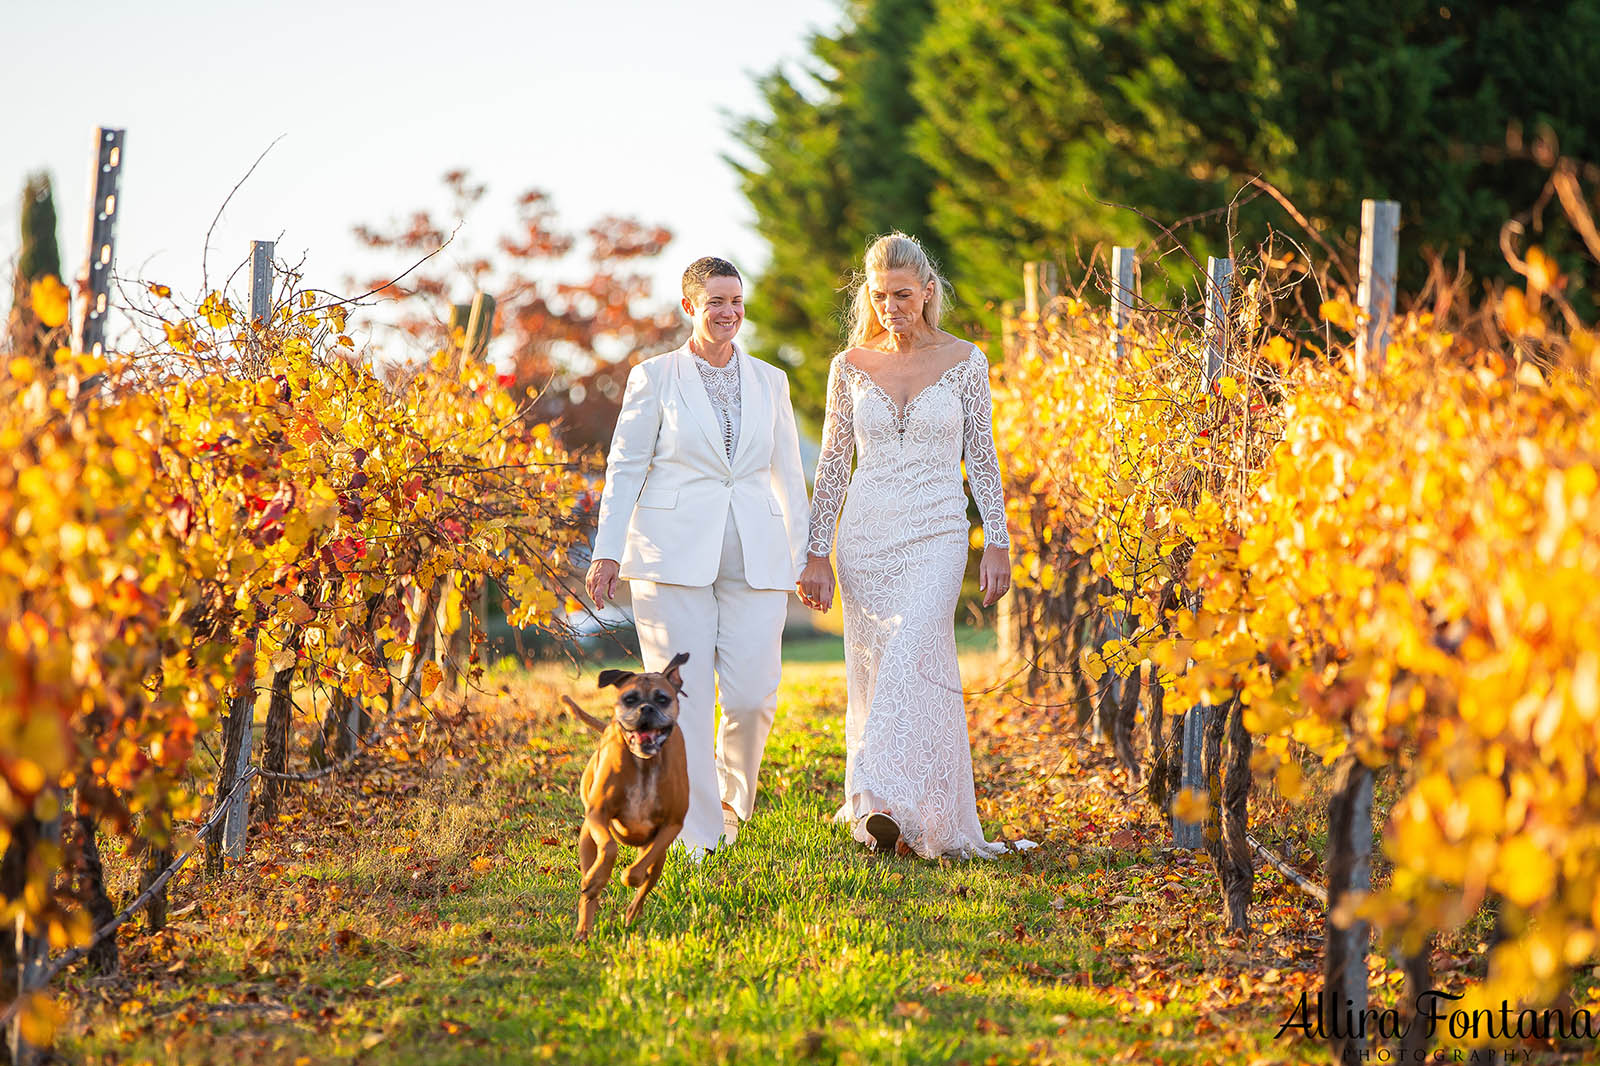 April and Somone's wedding at Southern Highlands Winery 